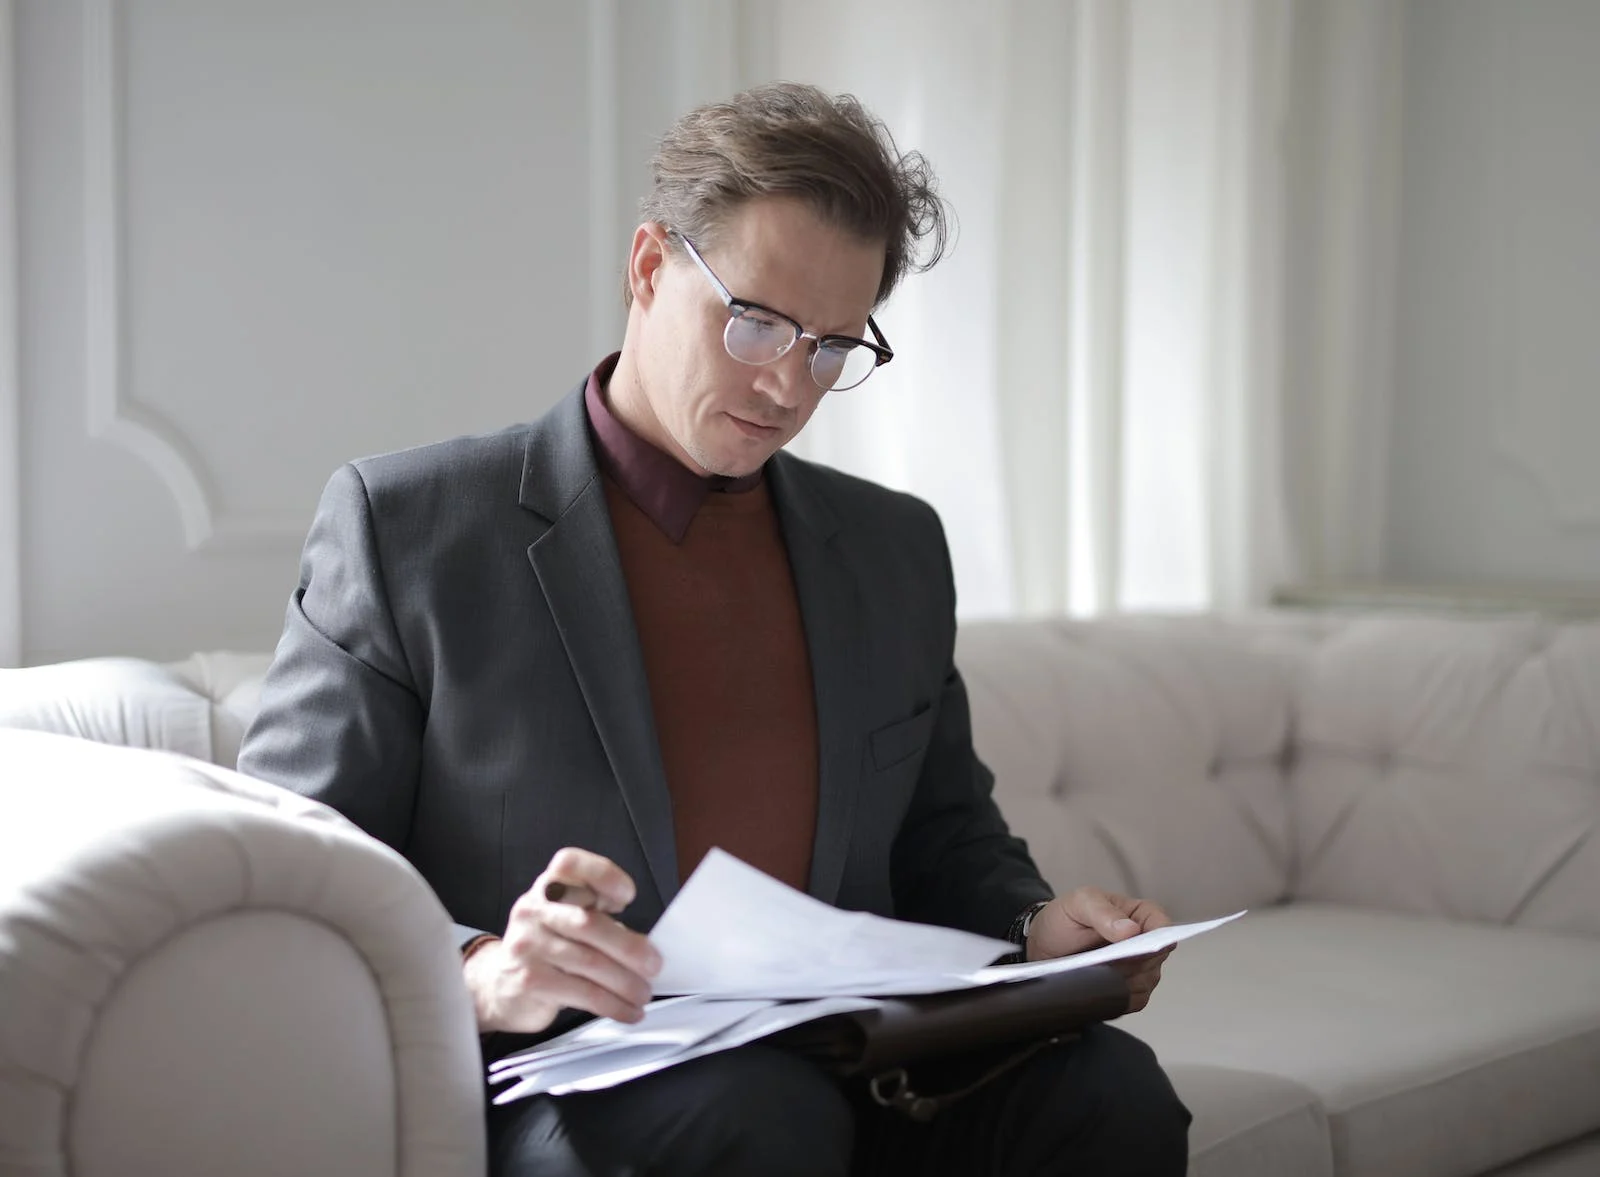 A Person In A Suit Looking At A Document, Symbolizing The Summary And Conclusion Of The Article